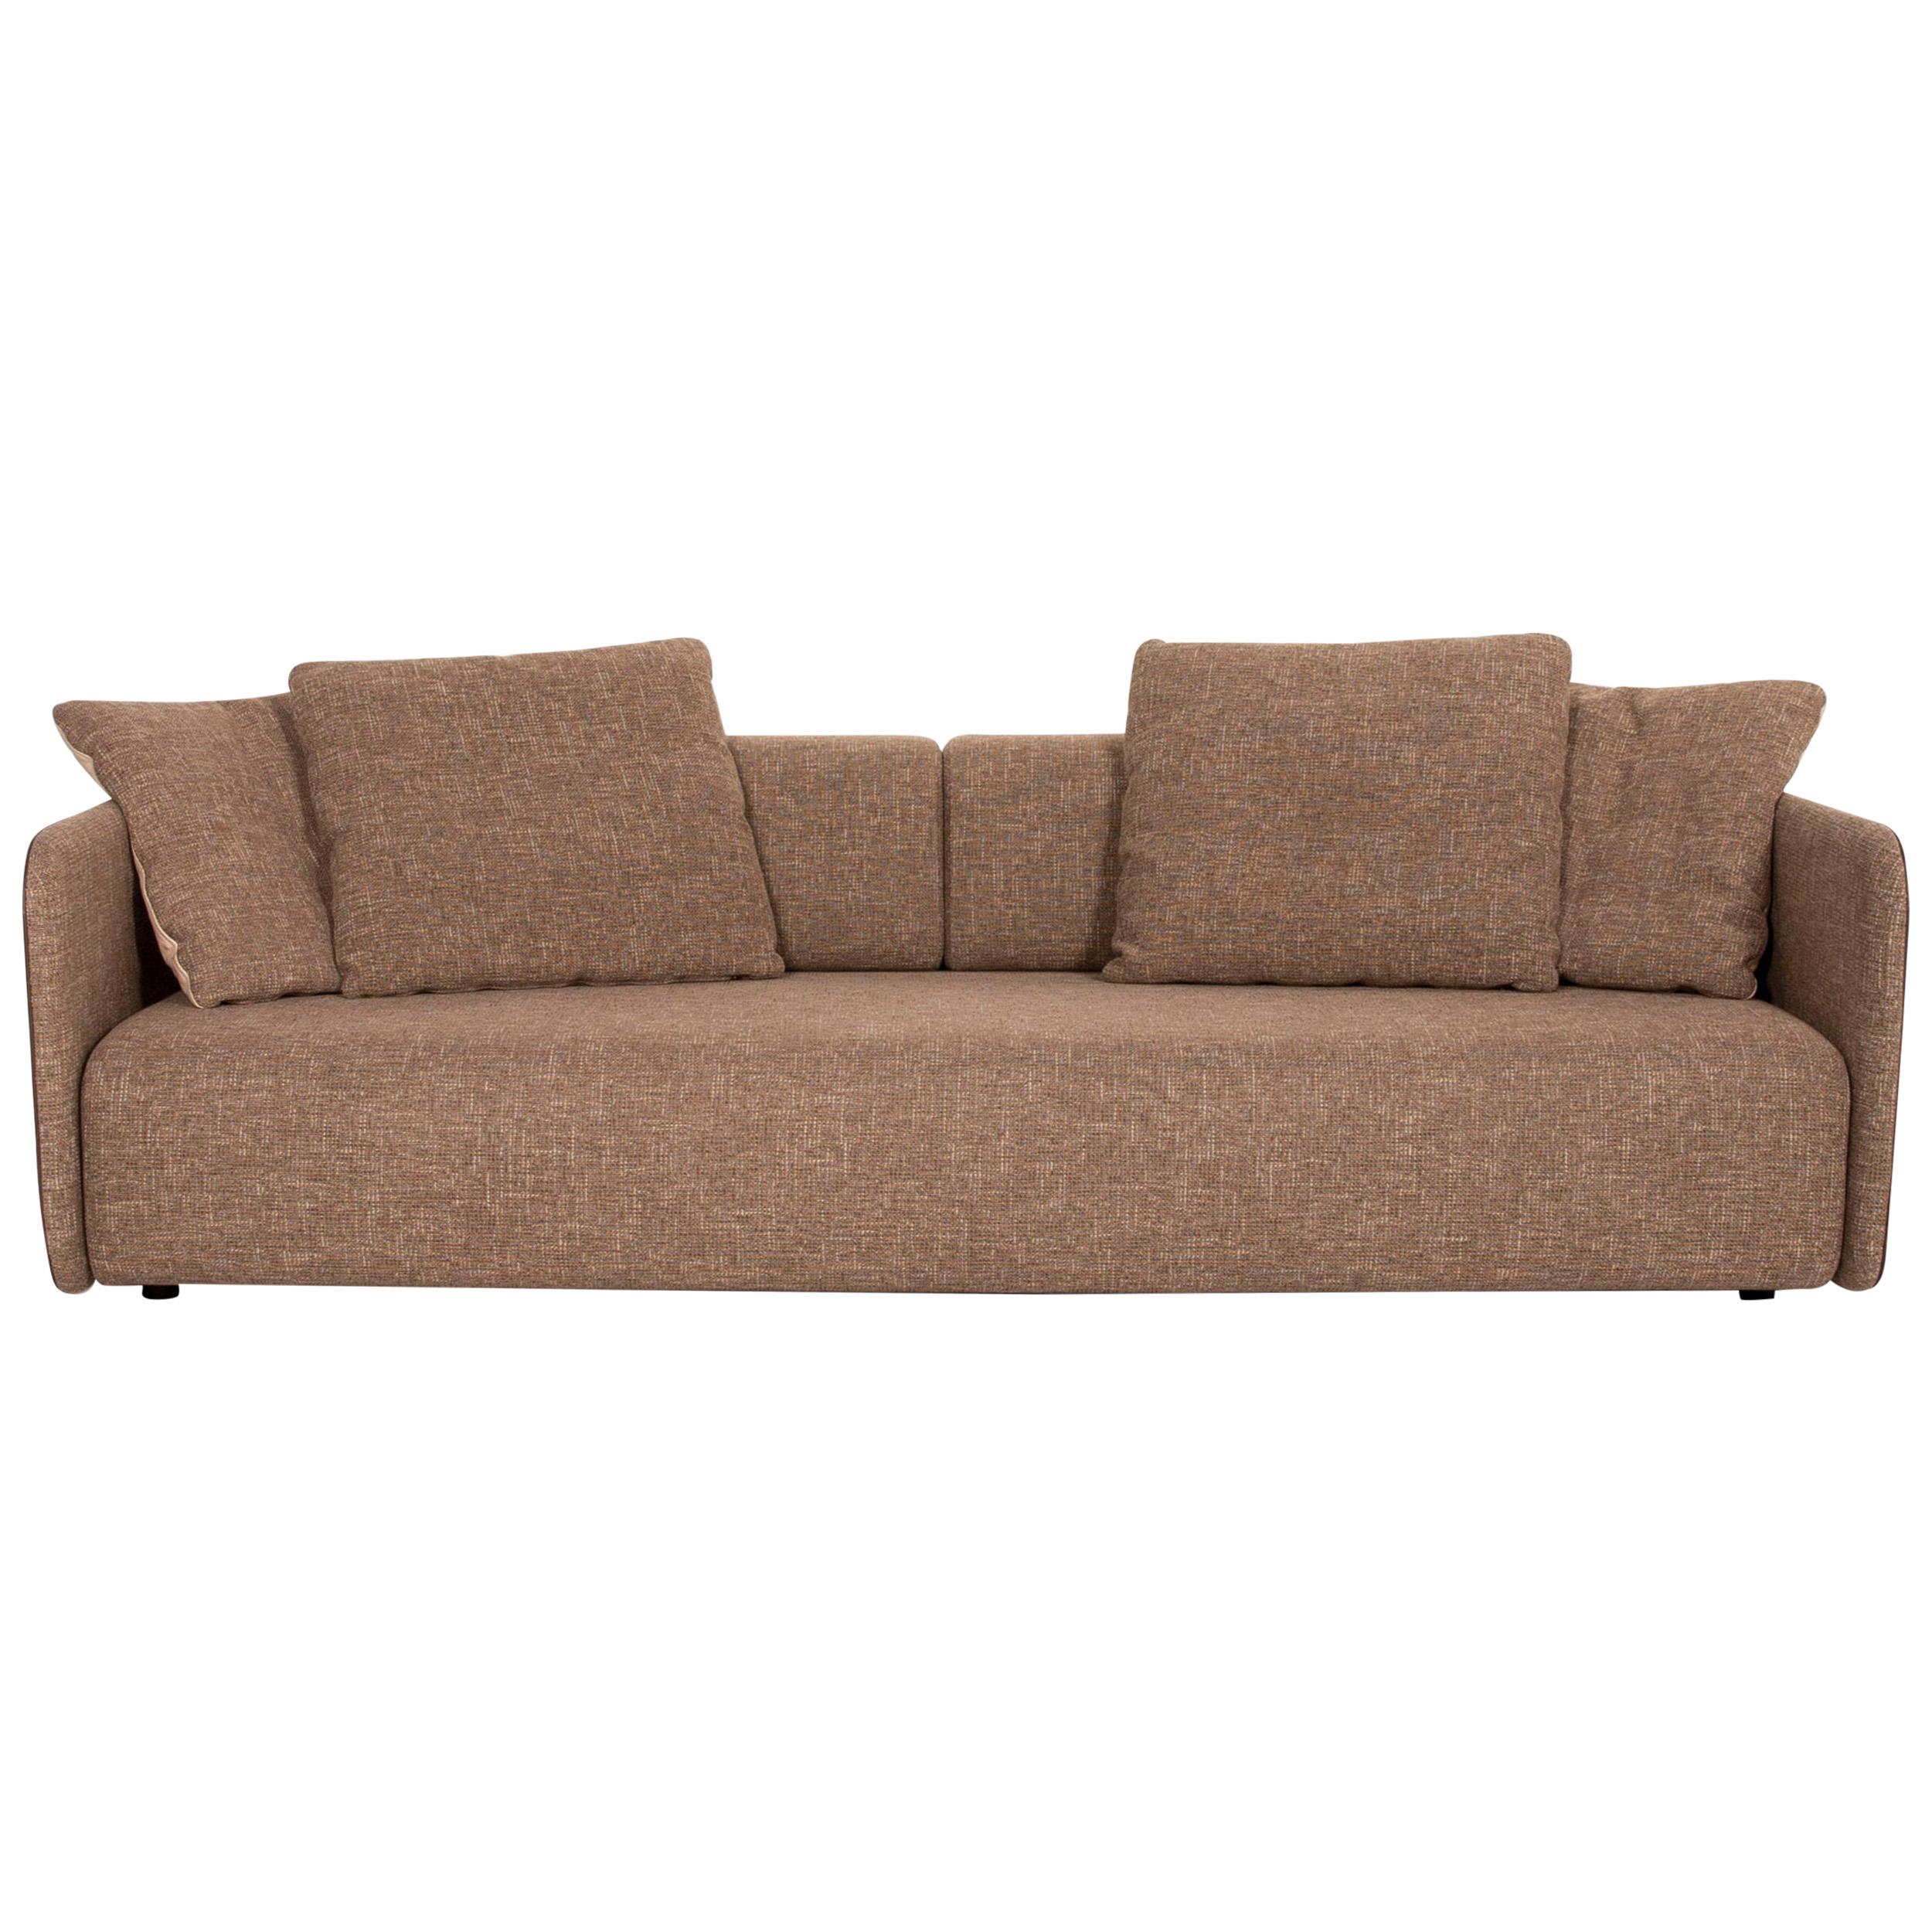 Rolf Benz 6900 Fabric Sofa Brown Three-Seat Couch For Sale